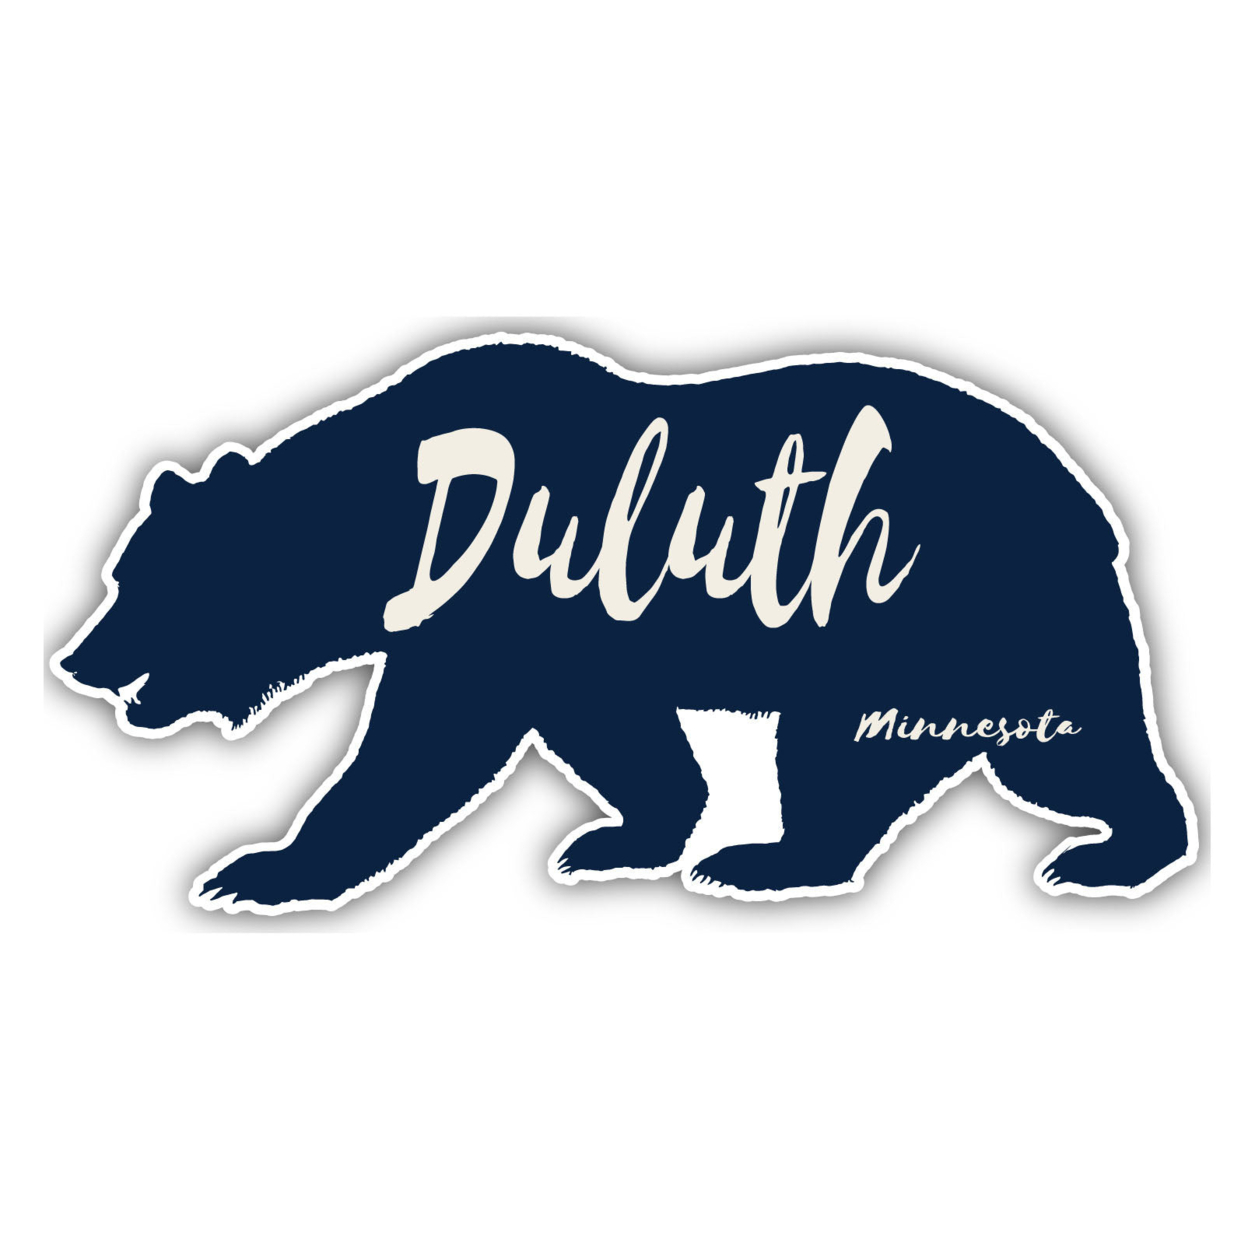 Duluth Minnesota Souvenir Decorative Stickers (Choose Theme And Size) - 4-Pack, 12-Inch, Adventures Awaits